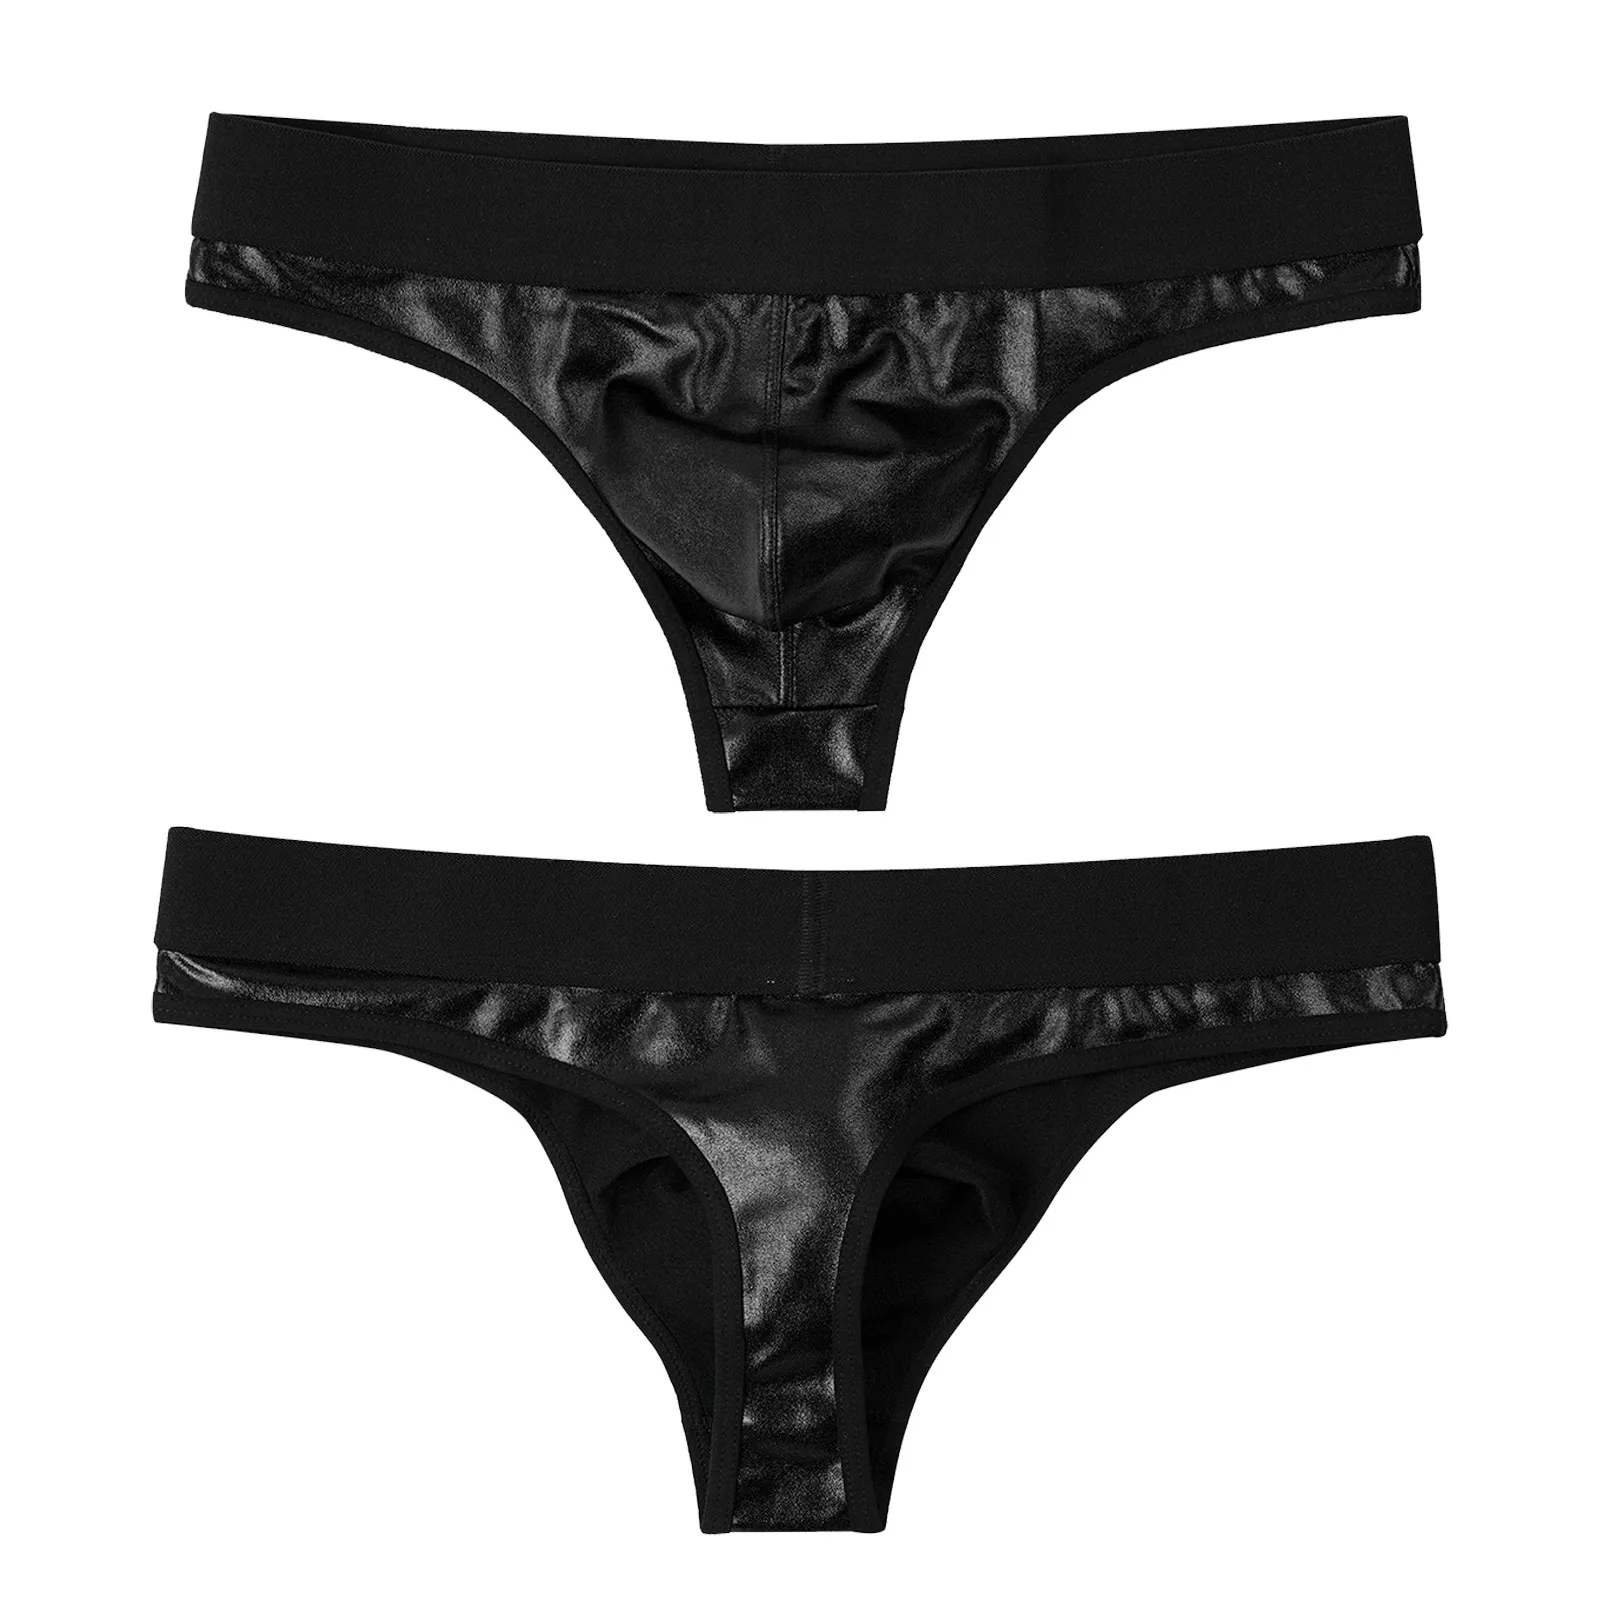 

Sexy Men Lingerie Shiny Briefs Gay Underwear Wetlook Patent Leather Bulge Pouch Briefs Sissy Underpants Low Rise Elastic Thongs